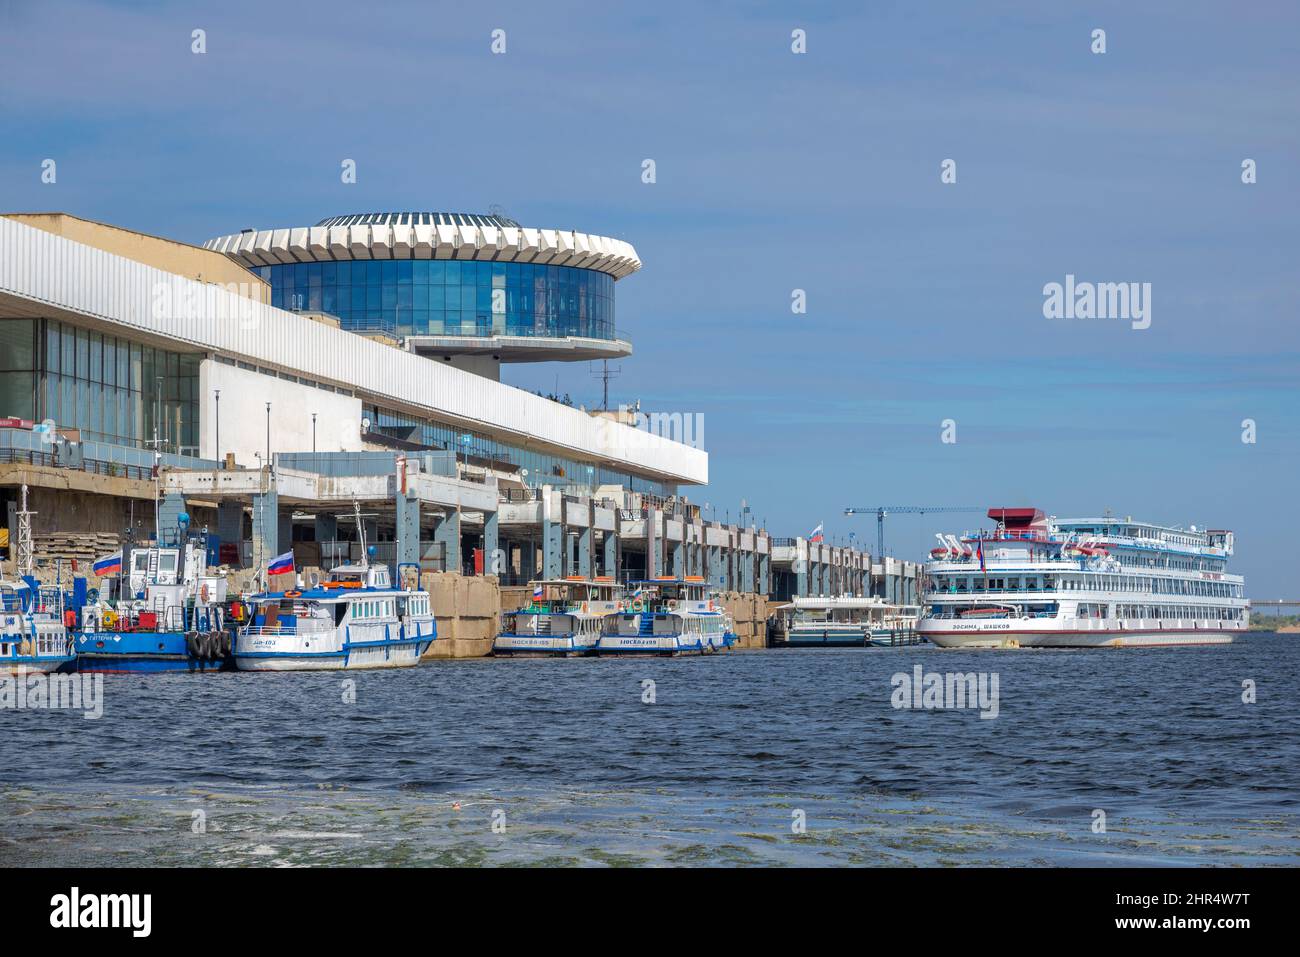 VOLGOGRAD, RUSSIA - SEPTEMBER 19, 2021: View of the river station building from the Volga side Stock Photo